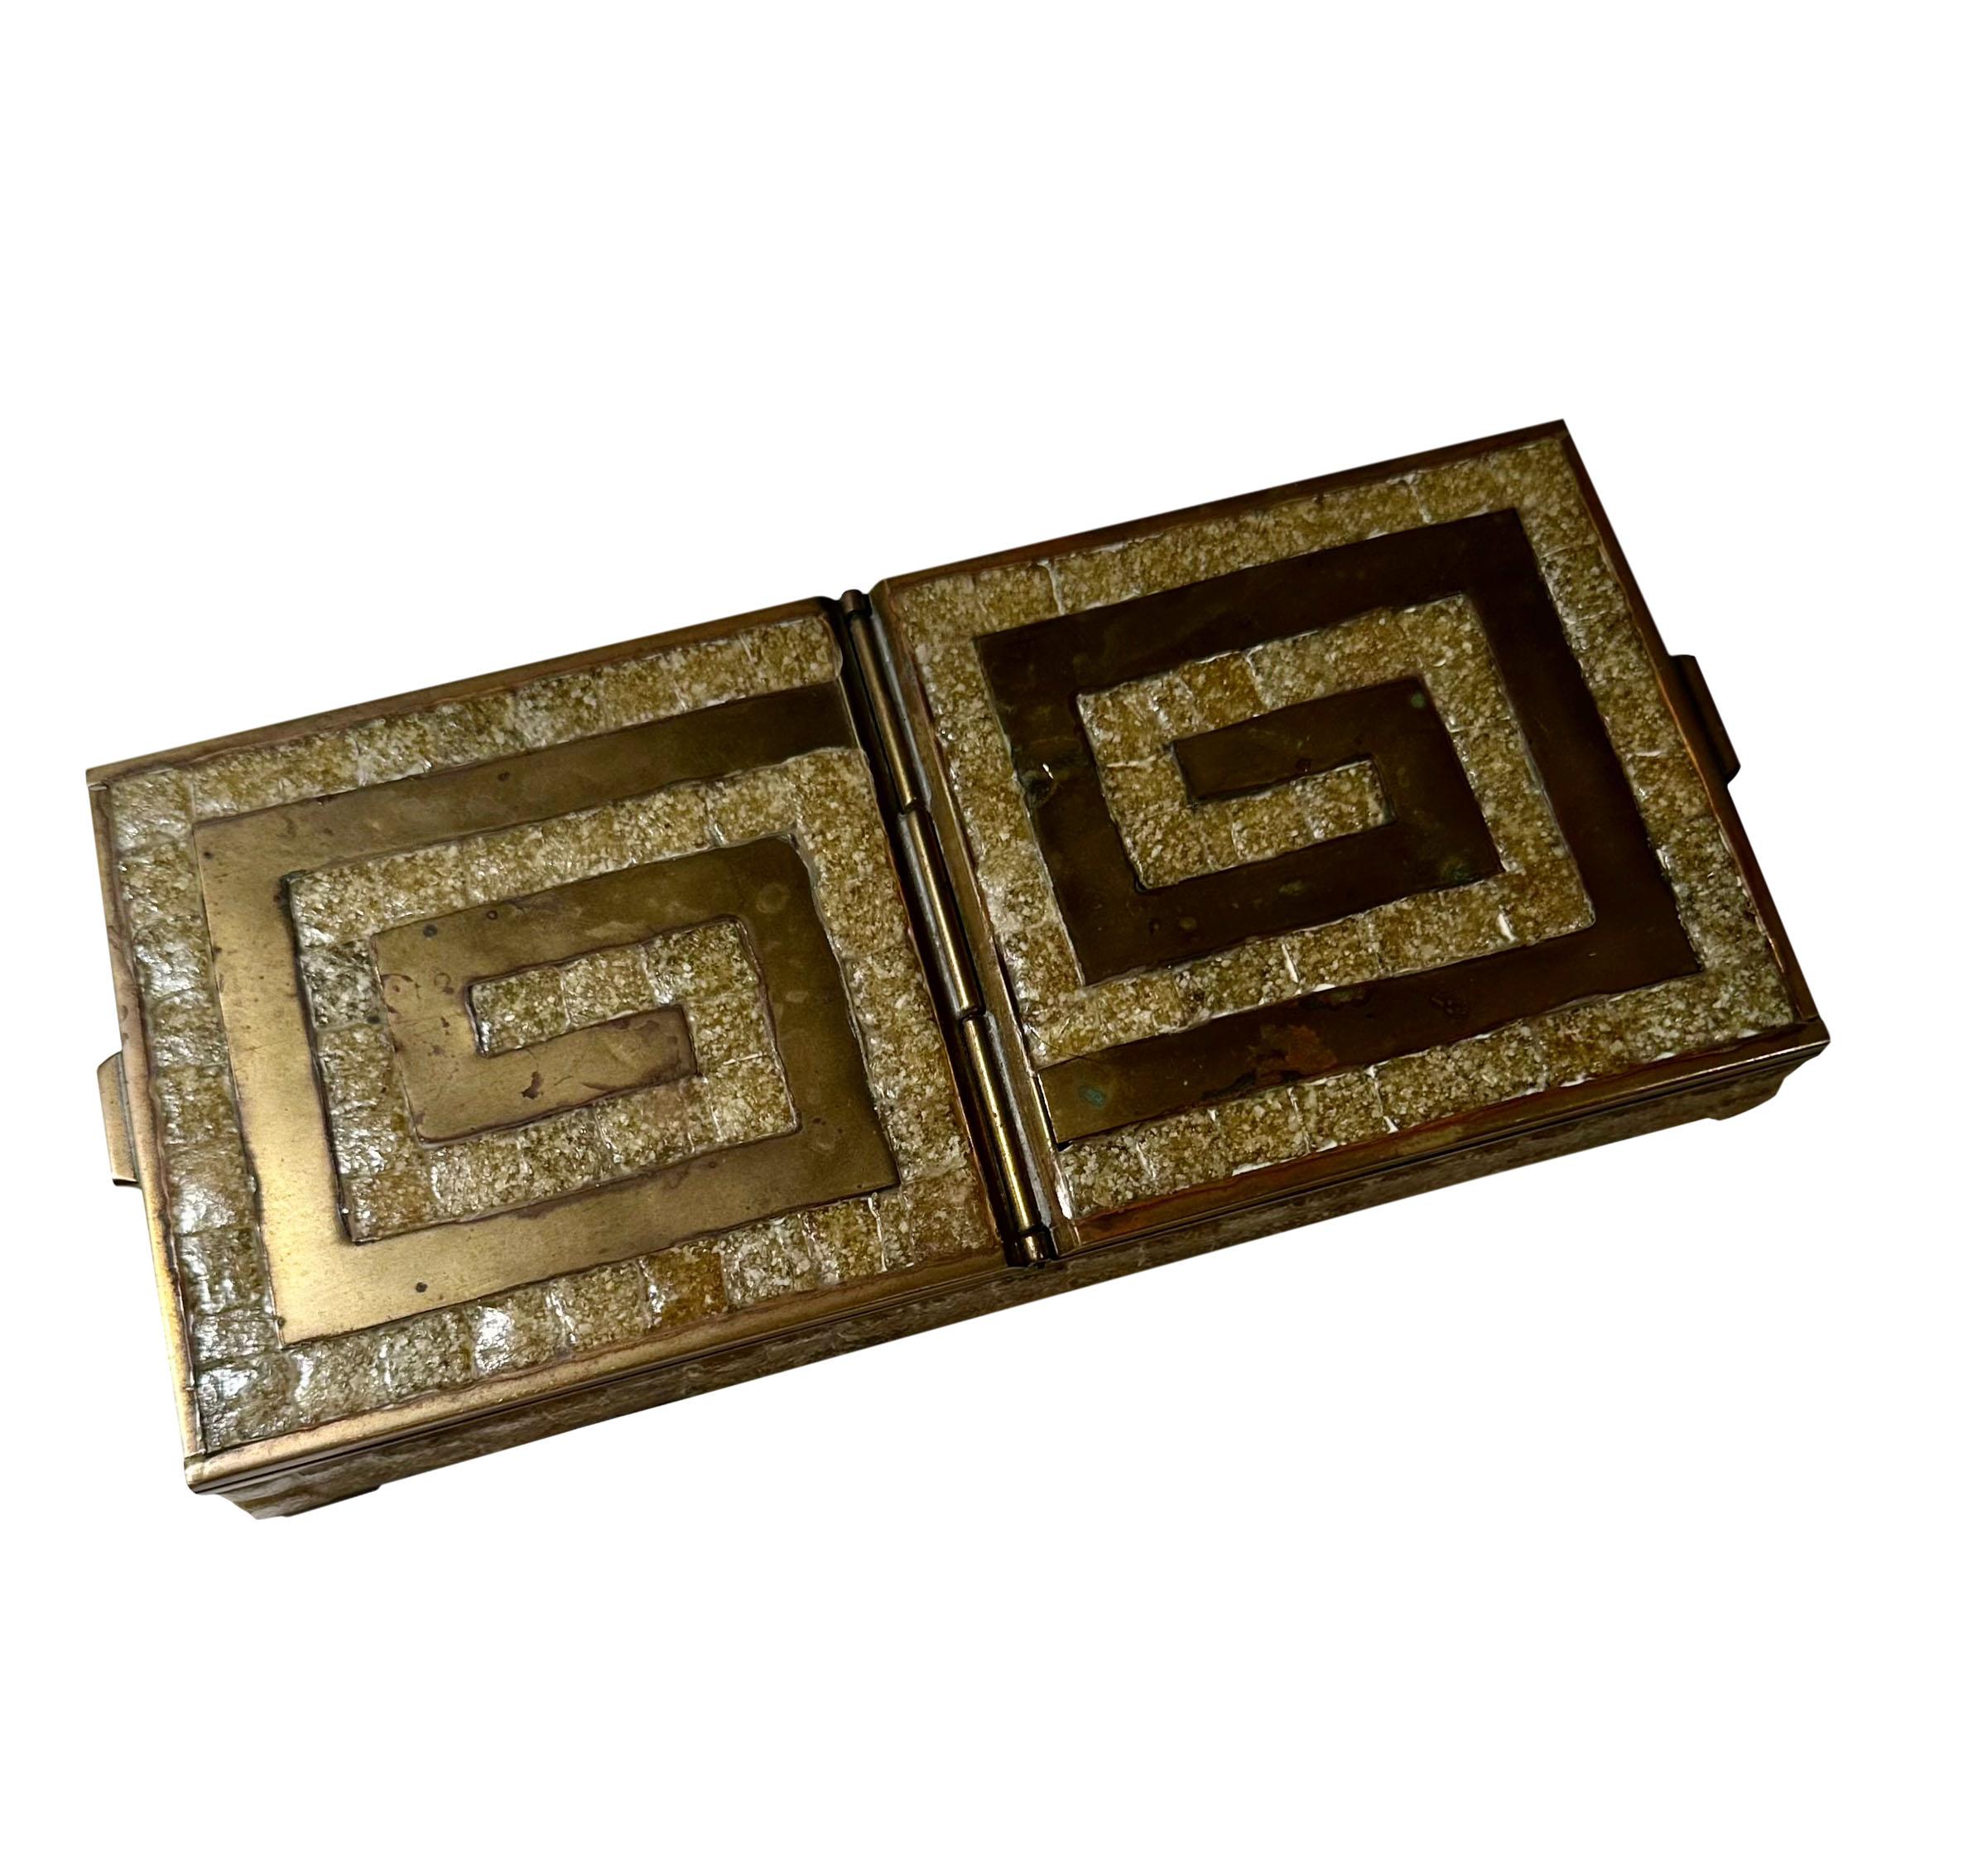 A wonderful brass box with a Greek key design in a marble or stone. The interior is lined in wood and has two compartments. It is very pretty. Circa 1940s, Mexico marked on bottom. 
